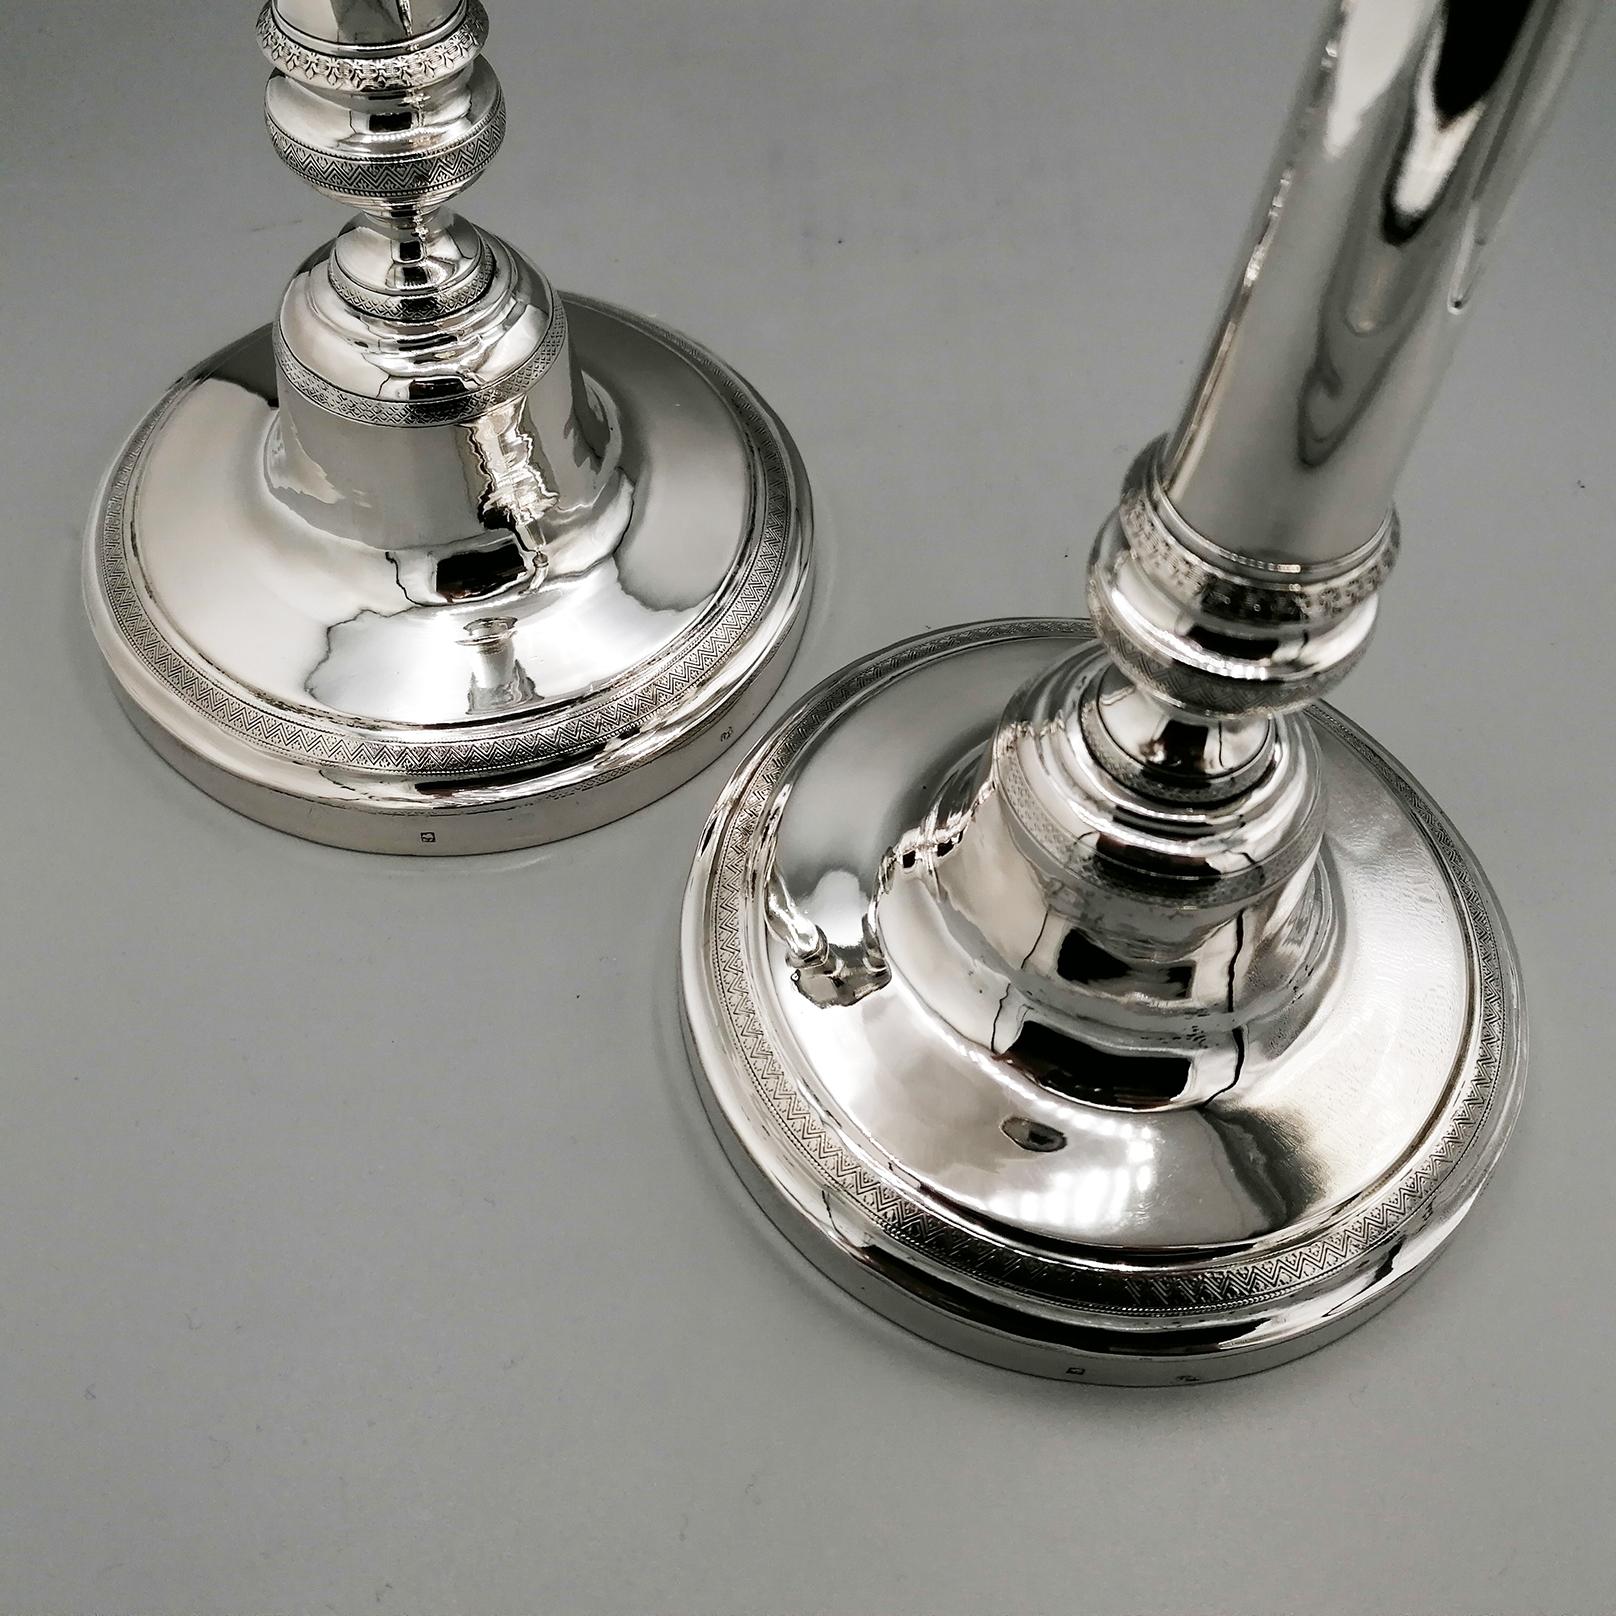 Pair of Italian silver candlesticks - Naples, c. 1840 For Sale 2